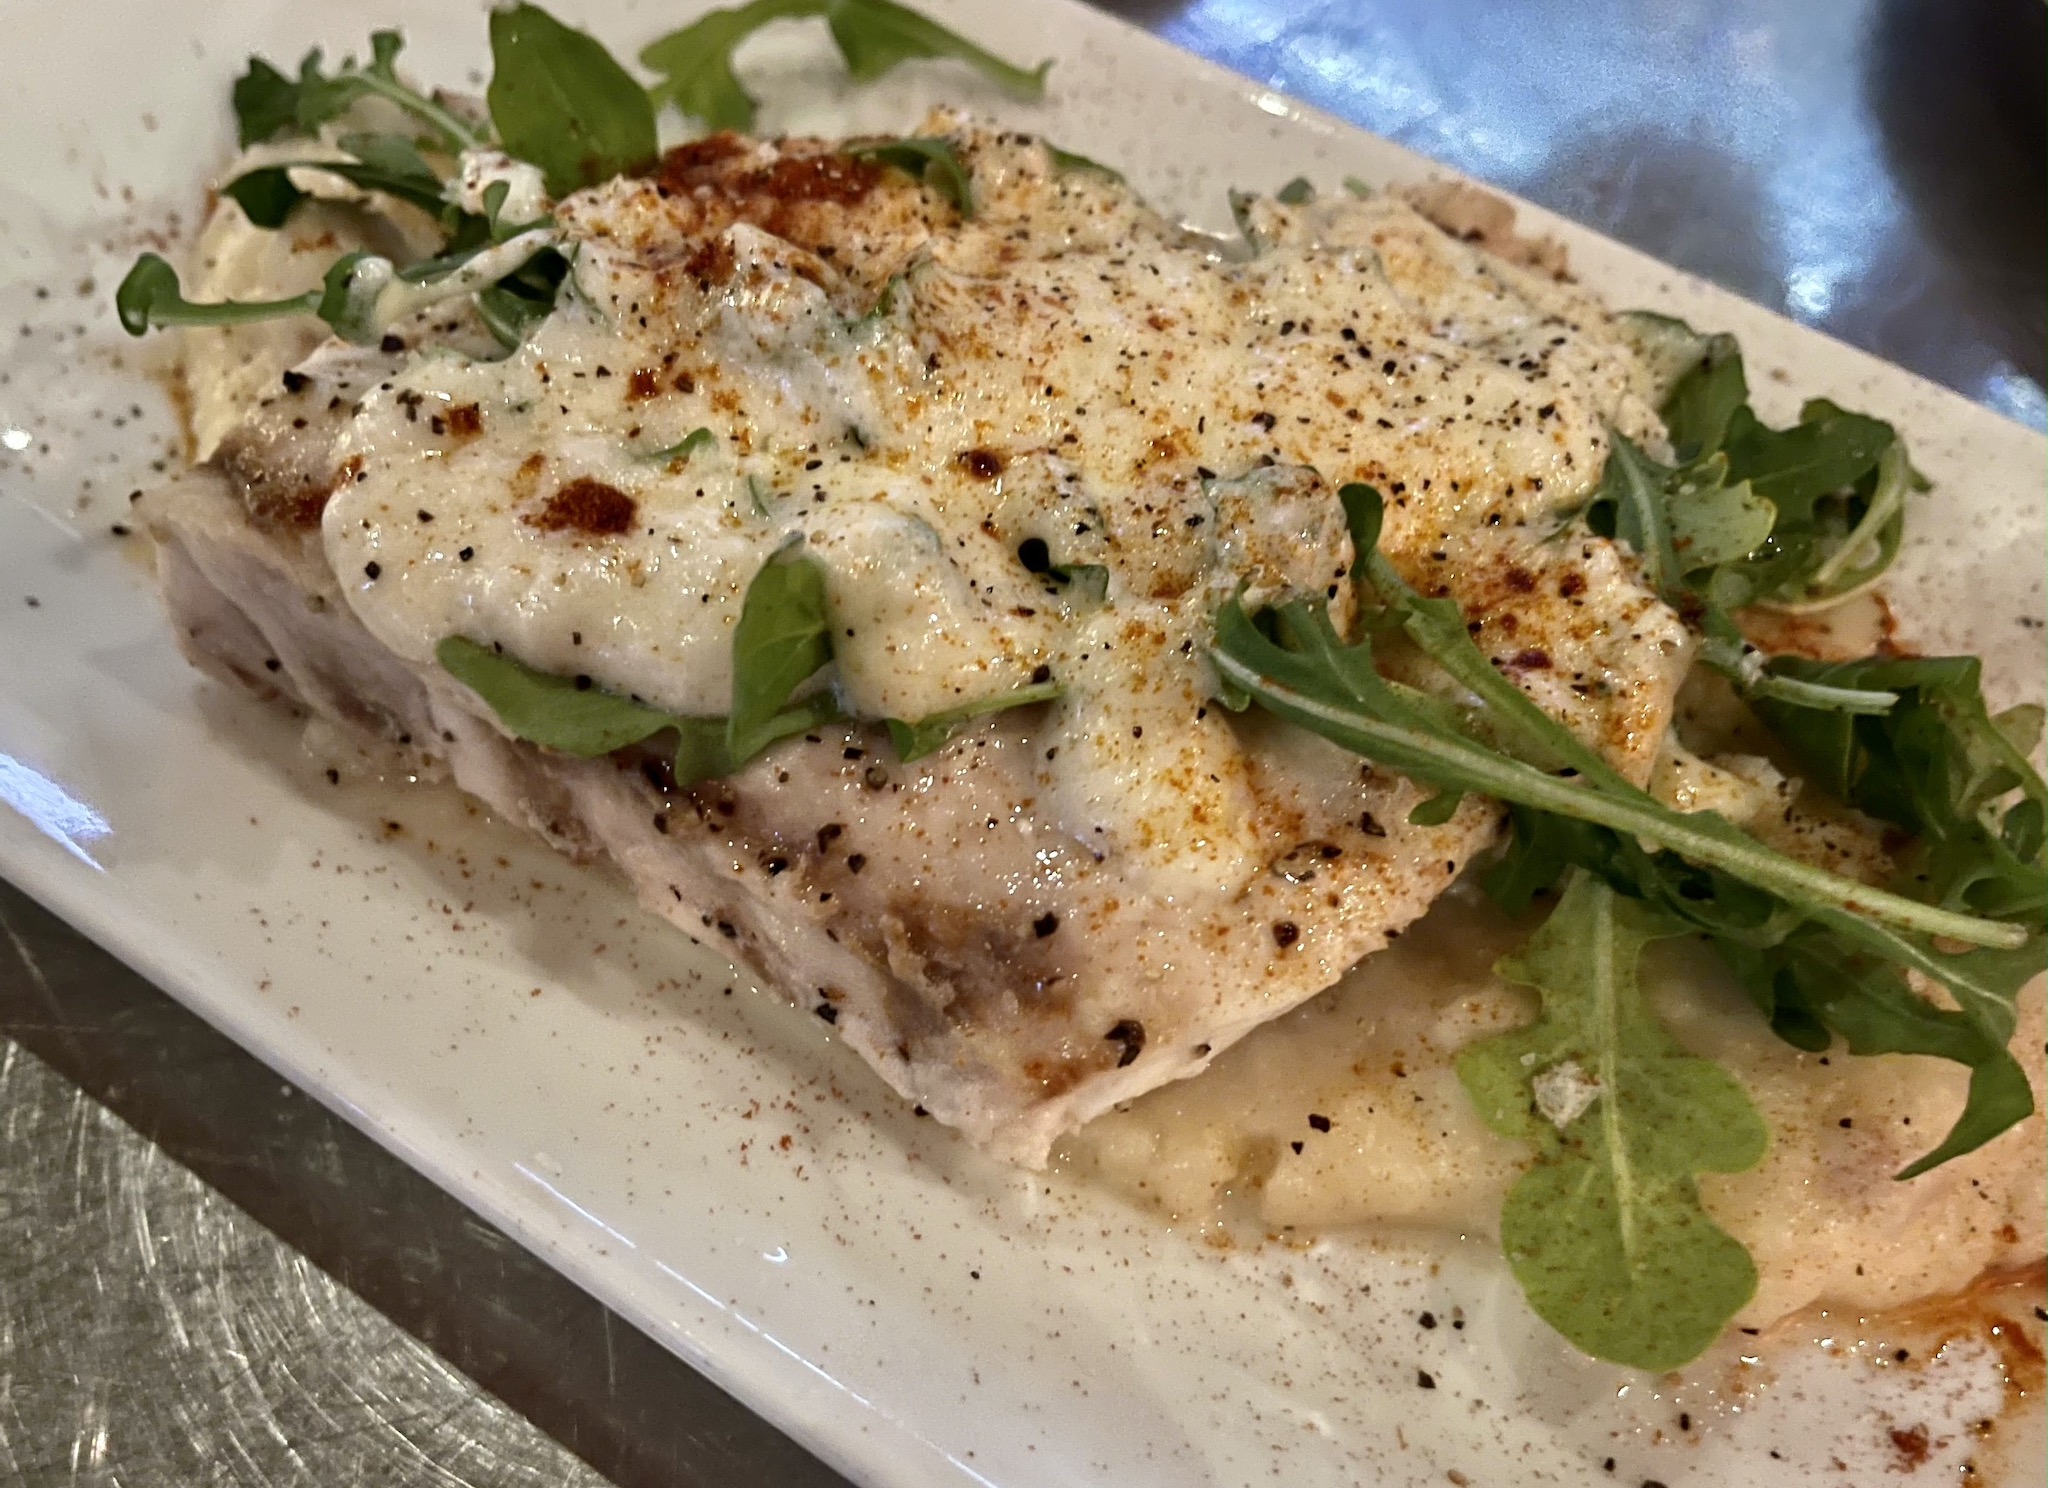 Renzo's Black Grouper - seared and served with a Champagne cream sauce